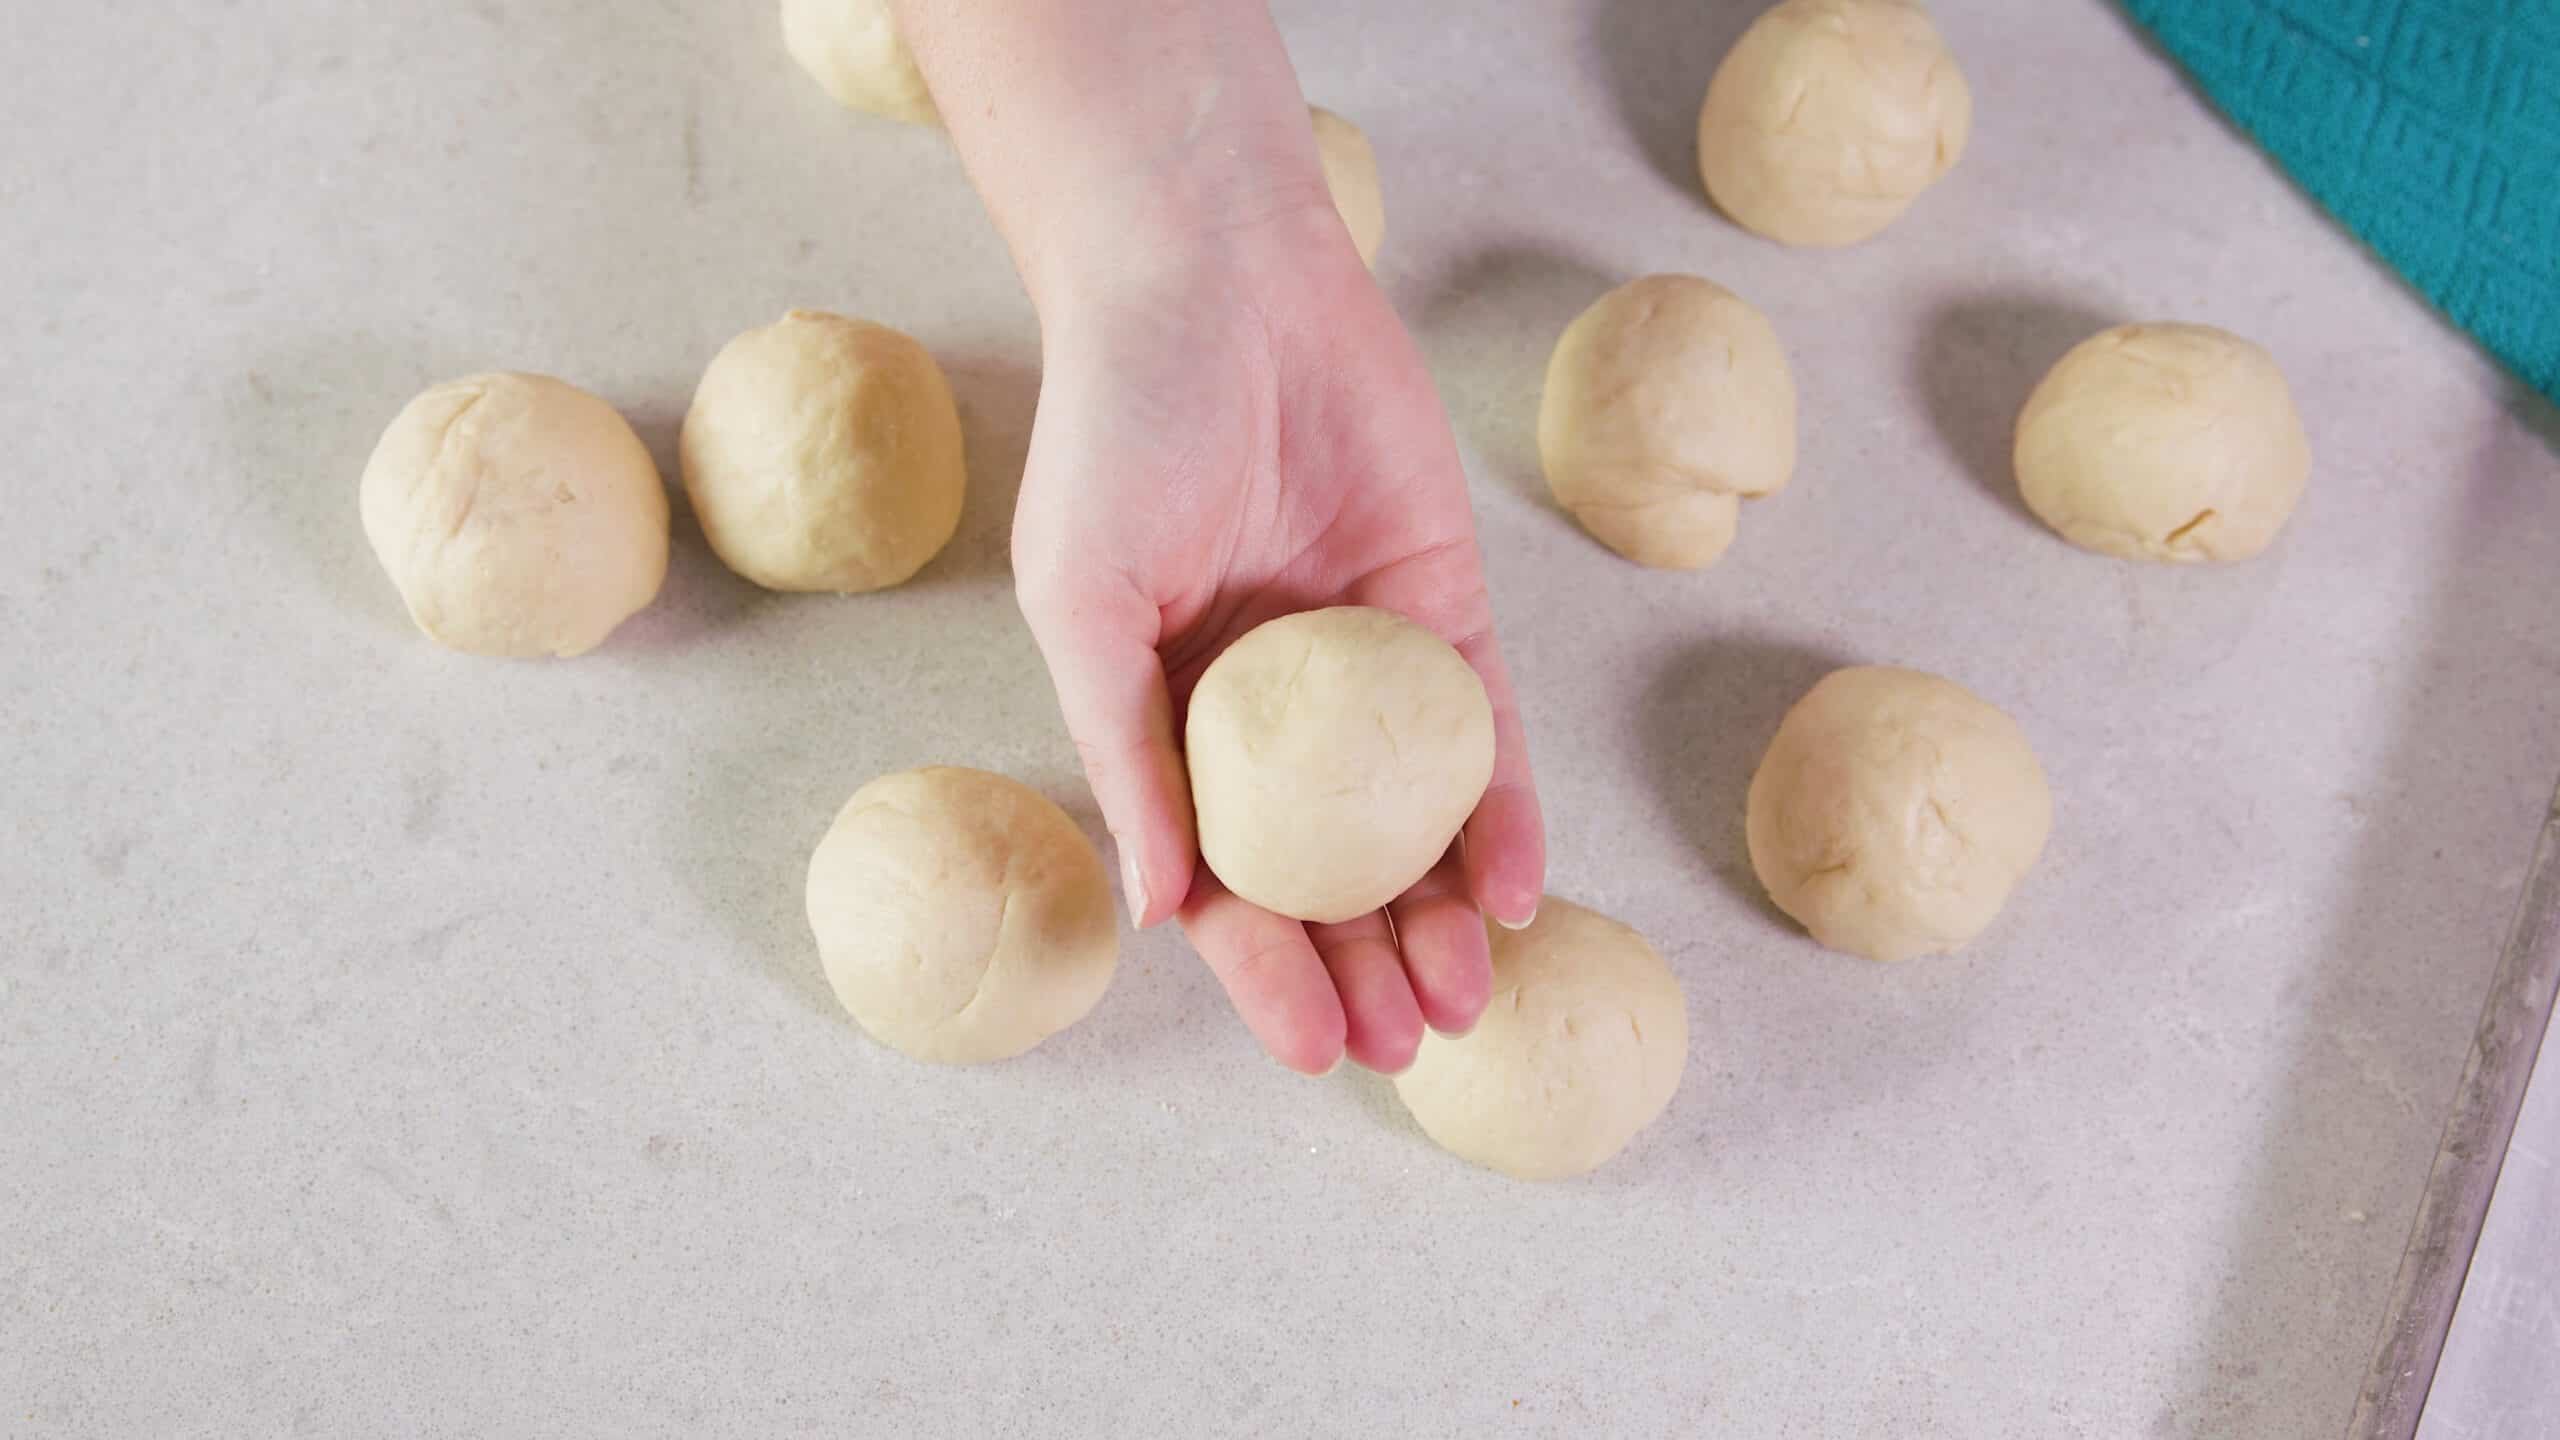 Bird's eye view of clean marble countertop with one dozen individual risen pretzel dough balls rolled and ready to form into pretzel shape.